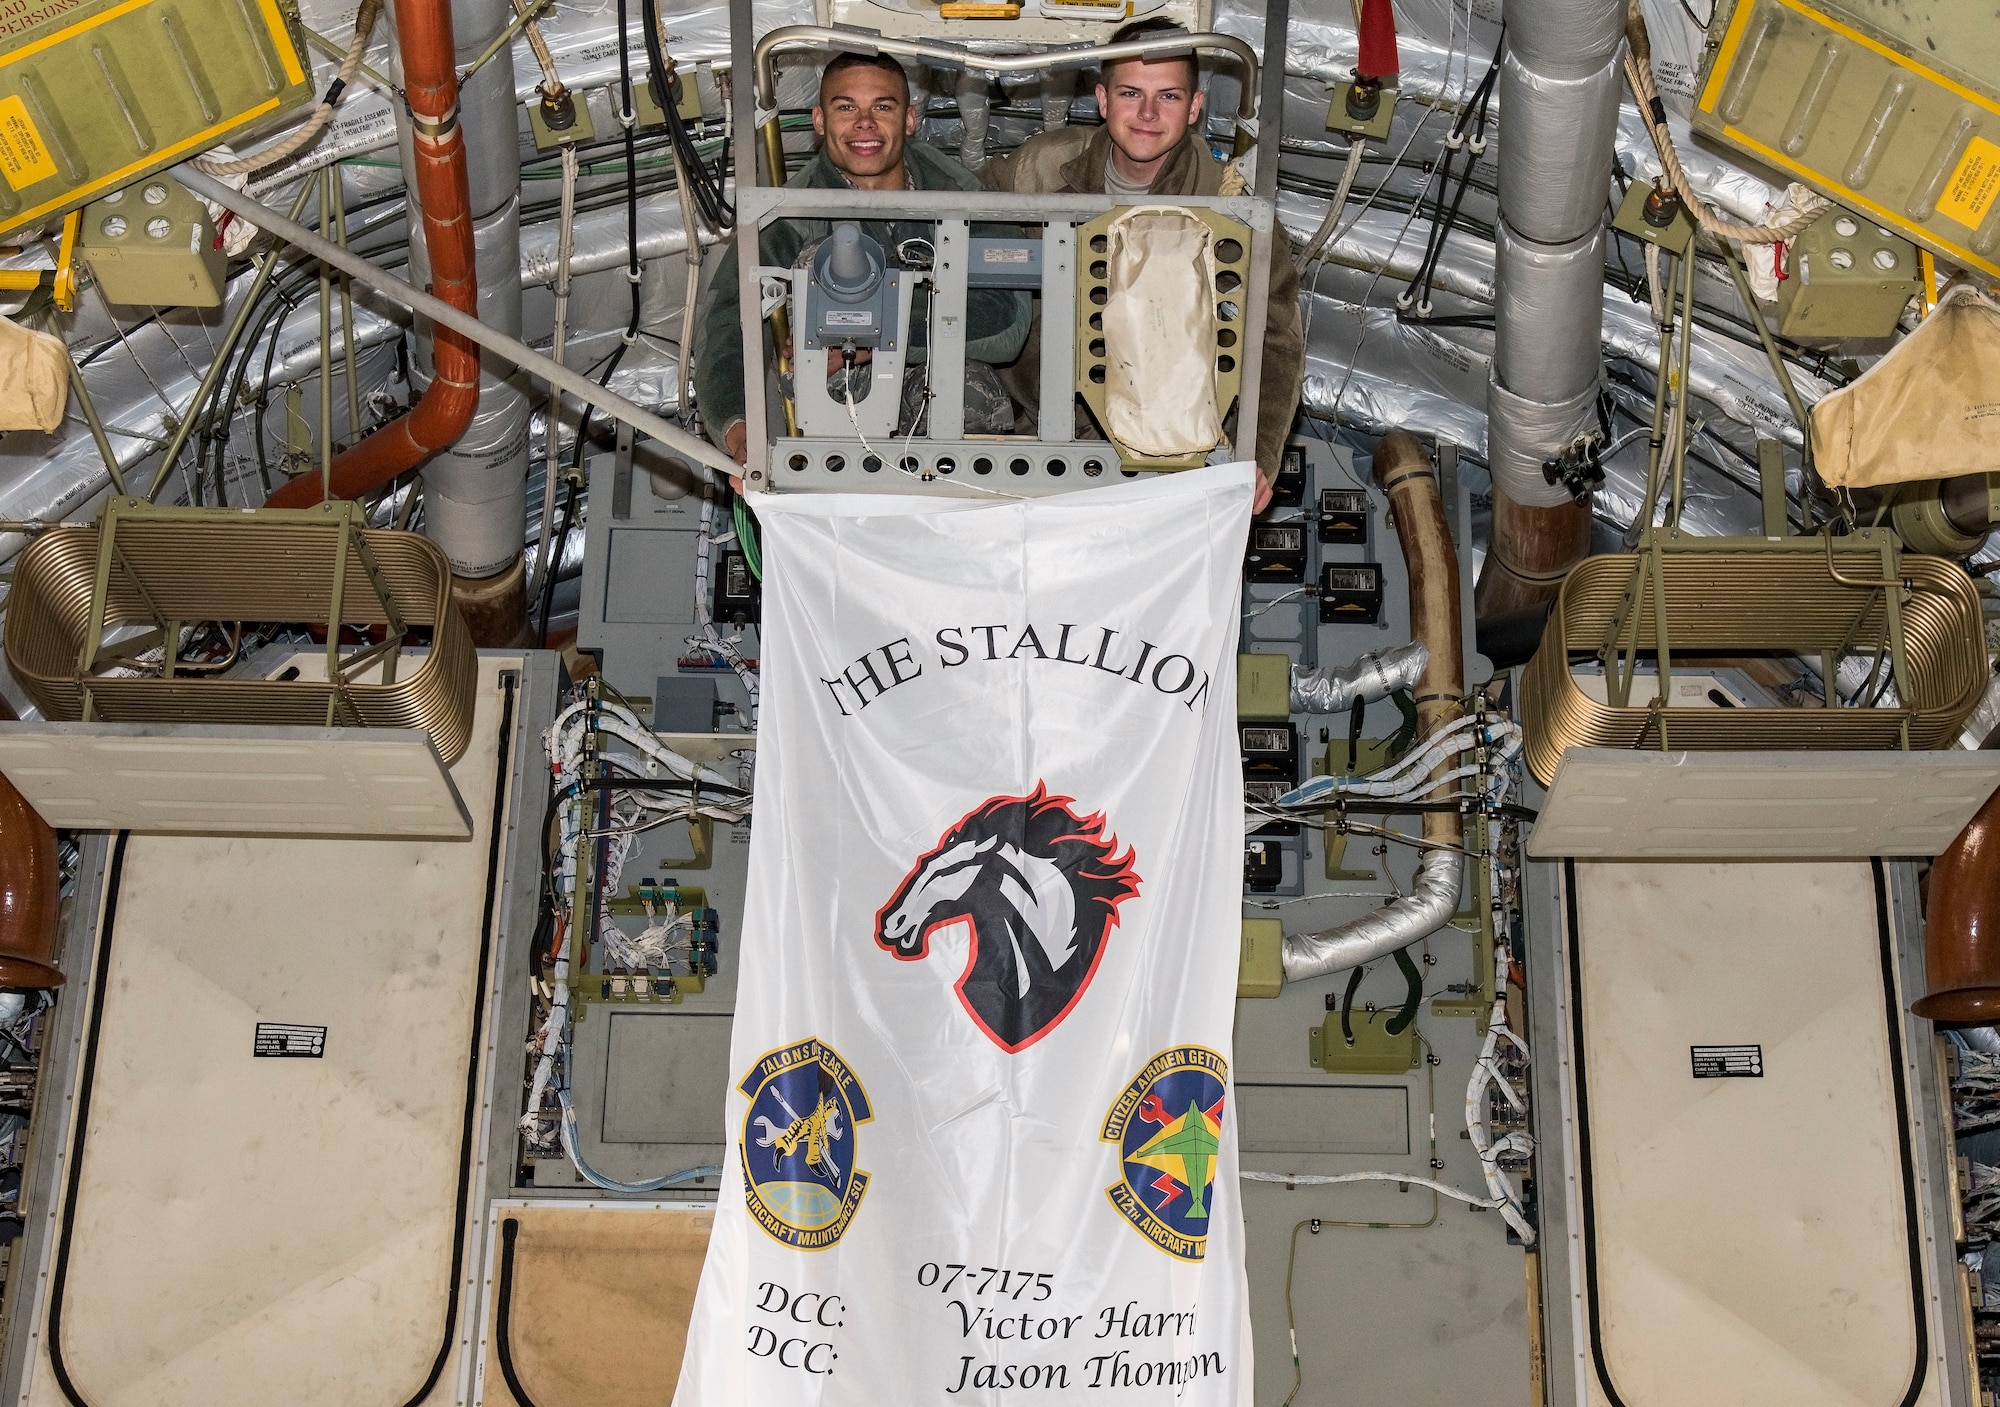 Senior Airman Victor Harris, right, Dedicated Crew Chief, and Airman 1st Class Jason Thompson, left, Assistant DCC, both assigned to the 736th Aircraft Maintenance Squadron, hold their aircraft flag where it will hang Nov. 21, 2018, at Dover Air Force Base, Del. Each of the 13 C-17 Globemaster III aircraft assigned to Dover will display a flag showing the unofficial name of the aircraft, tail number, and the names of the DCC and ADCC. (U.S. Air Force photo by Roland Balik)